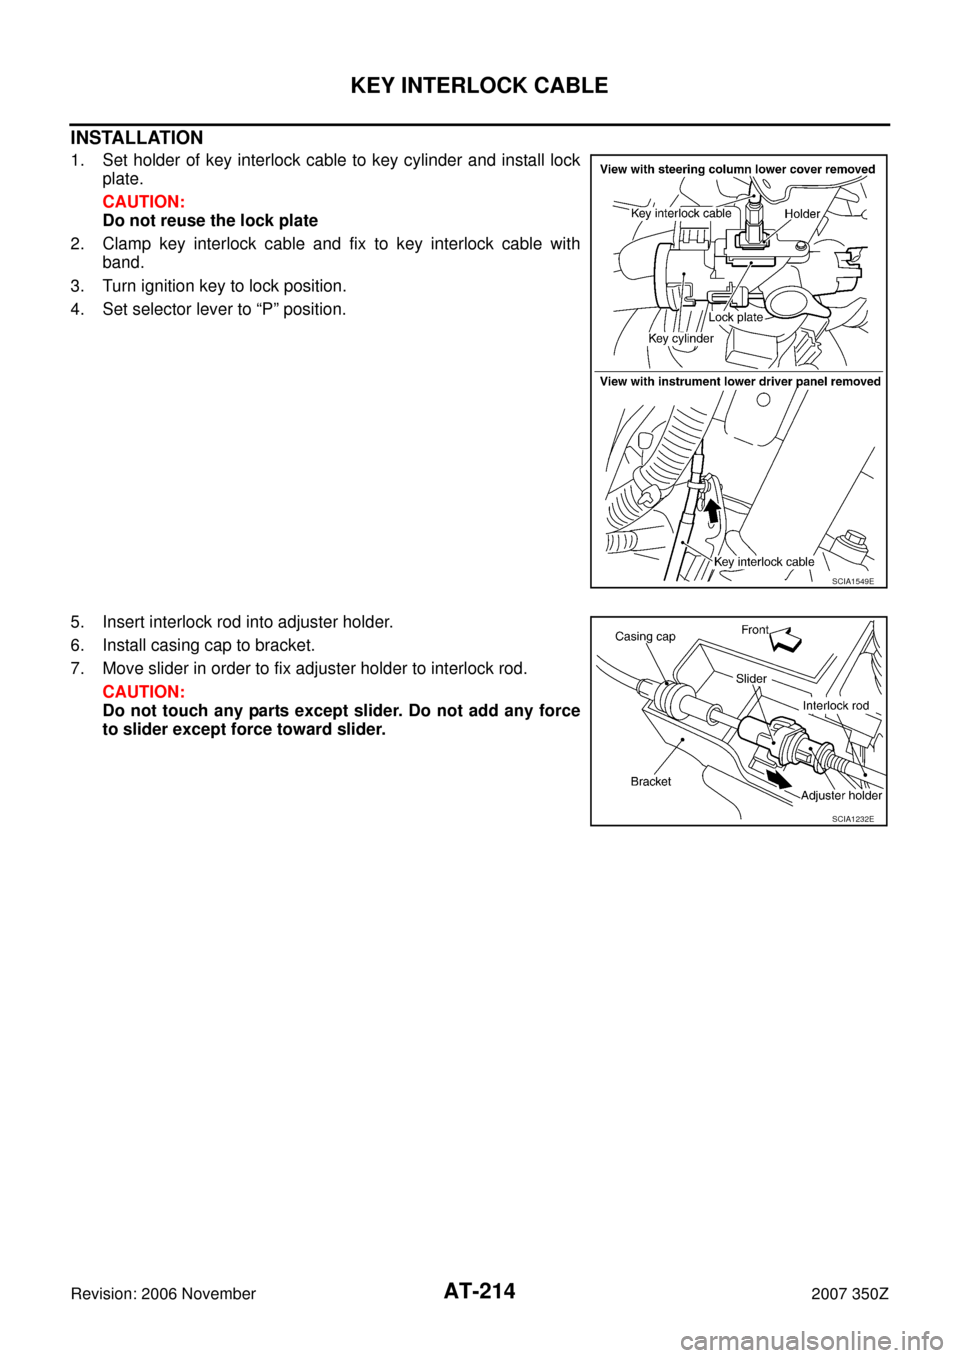 NISSAN 350Z 2007 Z33 Automatic Transmission Workshop Manual AT-214
KEY INTERLOCK CABLE
Revision: 2006 November2007 350Z
INSTALLATION
1. Set holder of key interlock cable to key cylinder and install lock
plate.
CAUTION:
Do not reuse the lock plate
2. Clamp key 